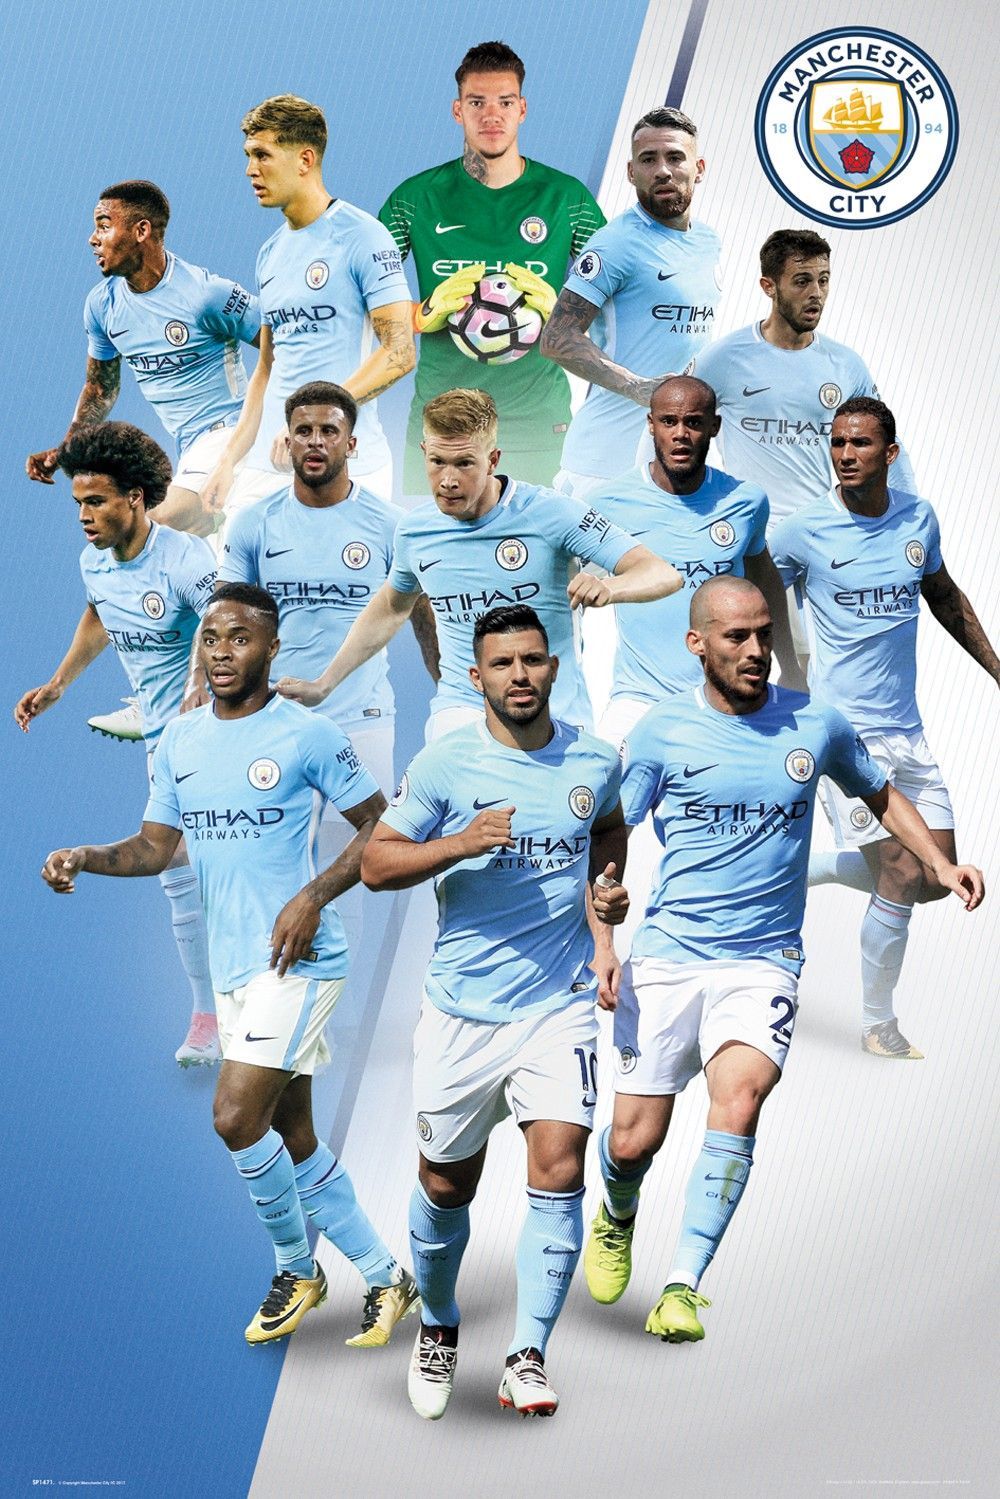 Manchester City 4K Wallpapers